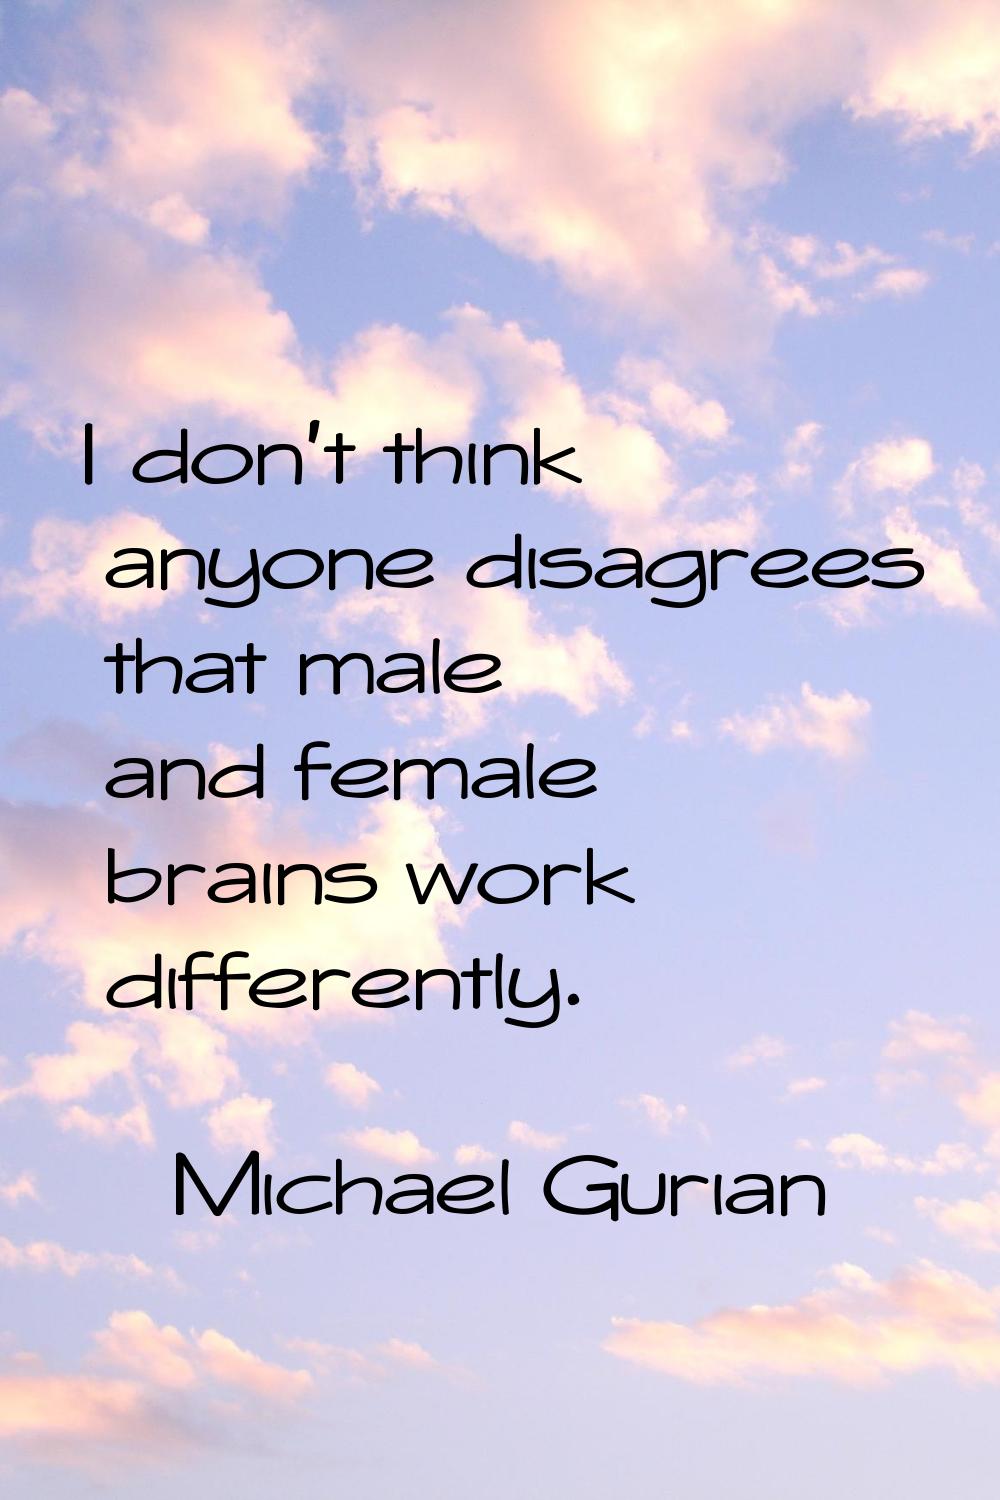 I don't think anyone disagrees that male and female brains work differently.